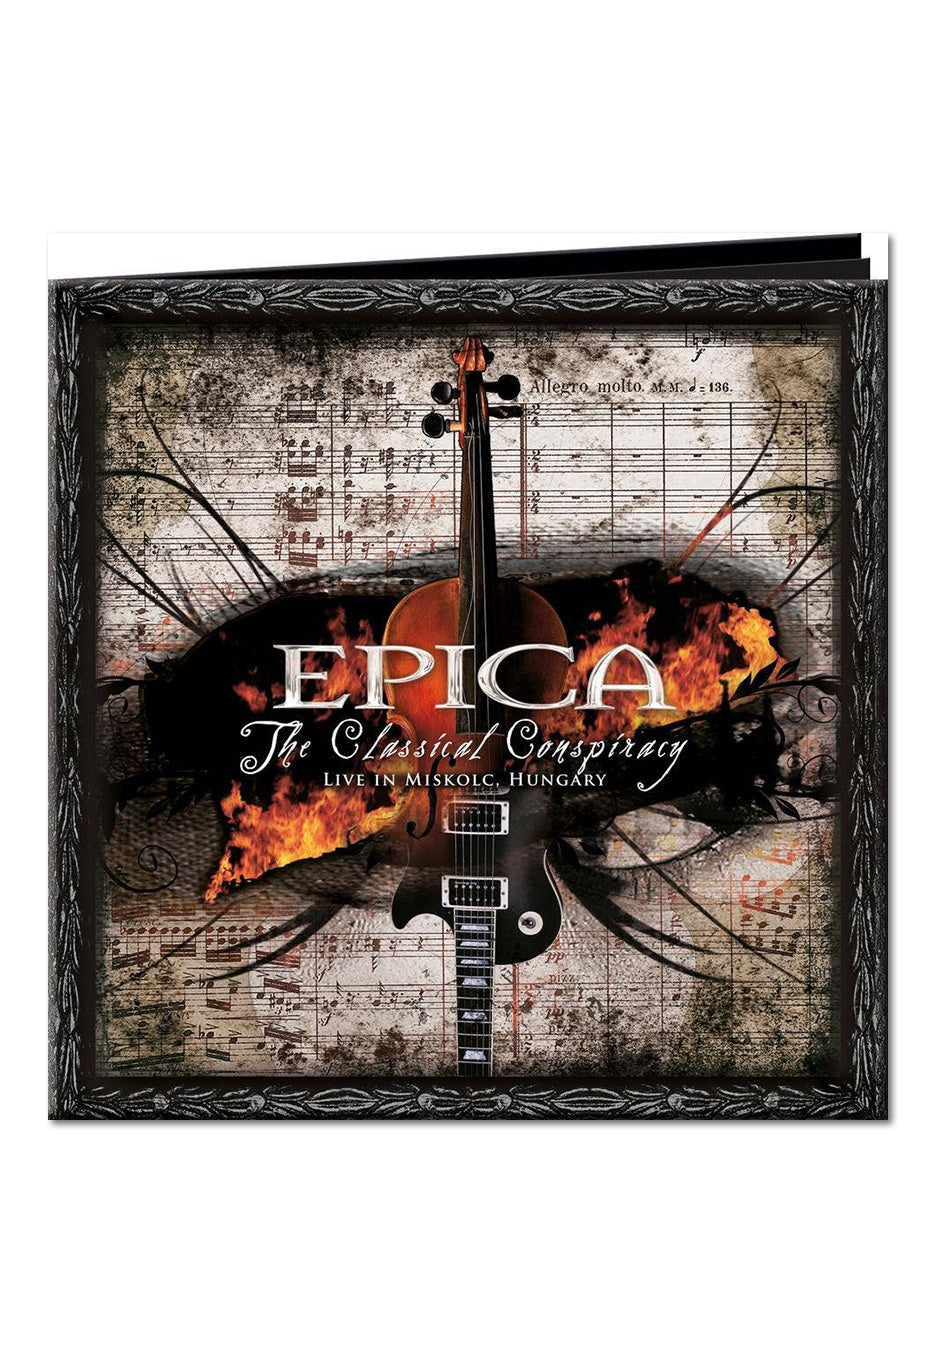 Epica - The Classical Conspiracy - 2 CD